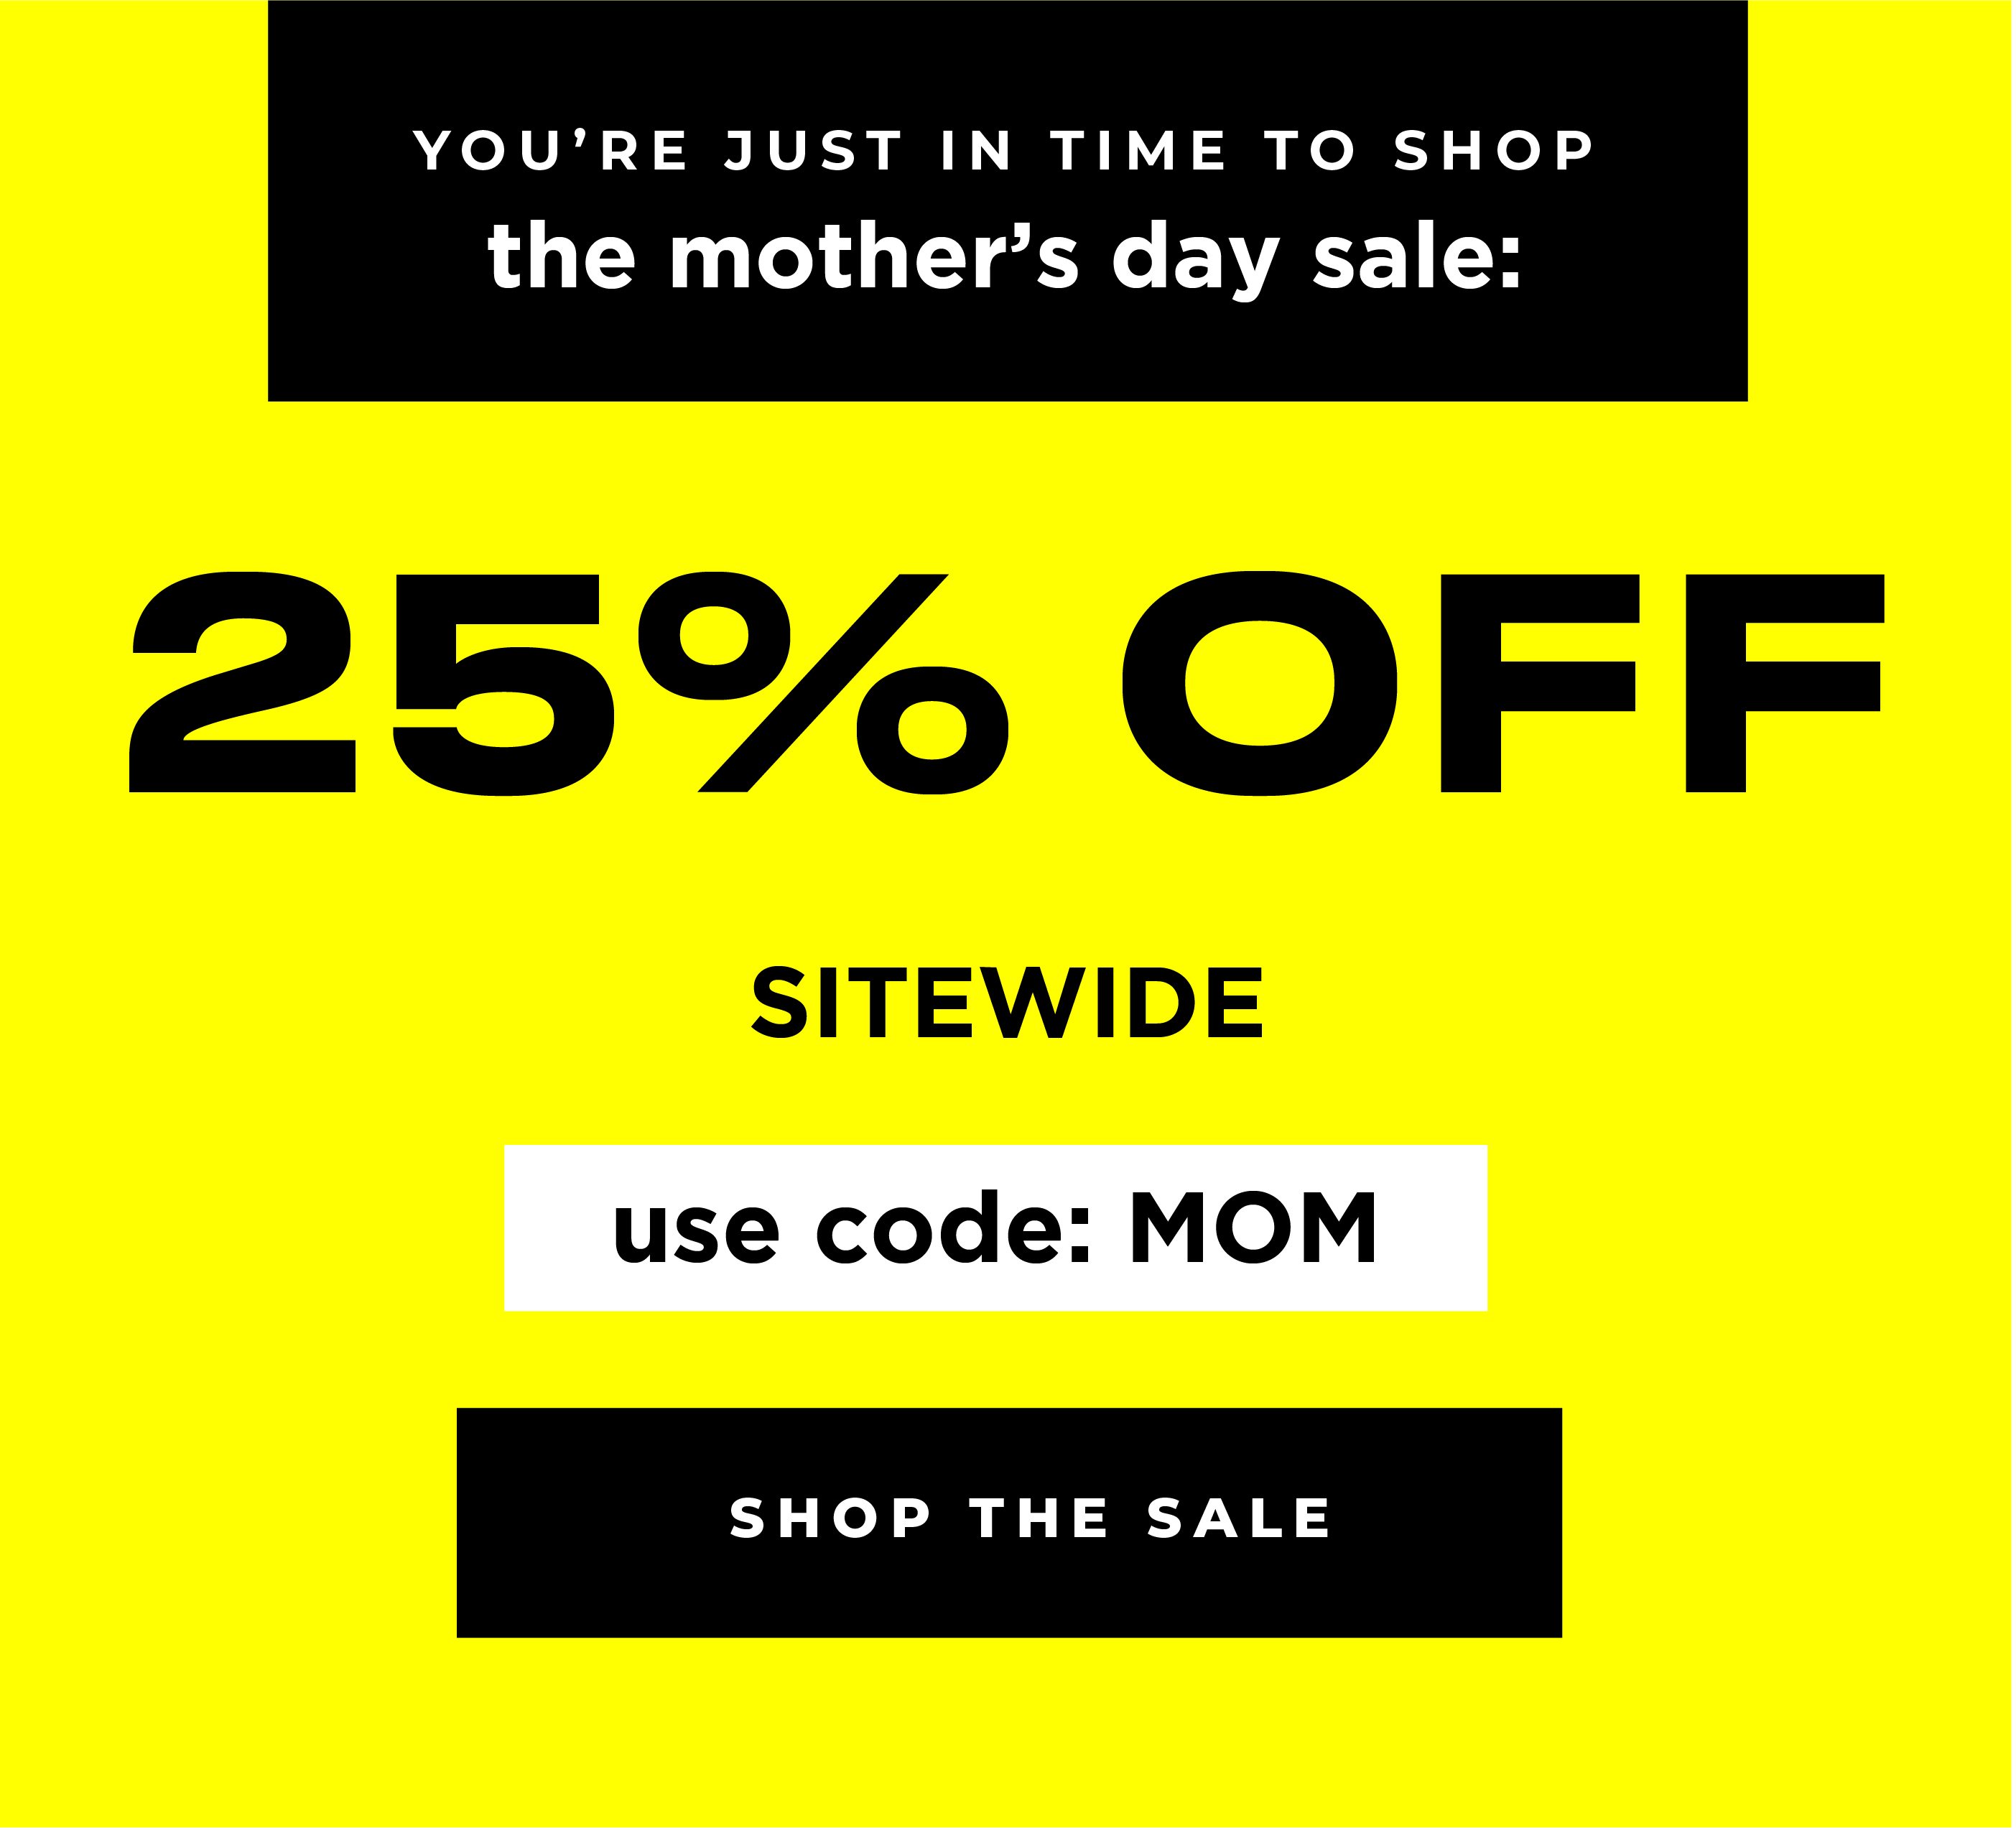 you're just in time to shop the Mother's Day sale: 25% off sitewide use code MOM